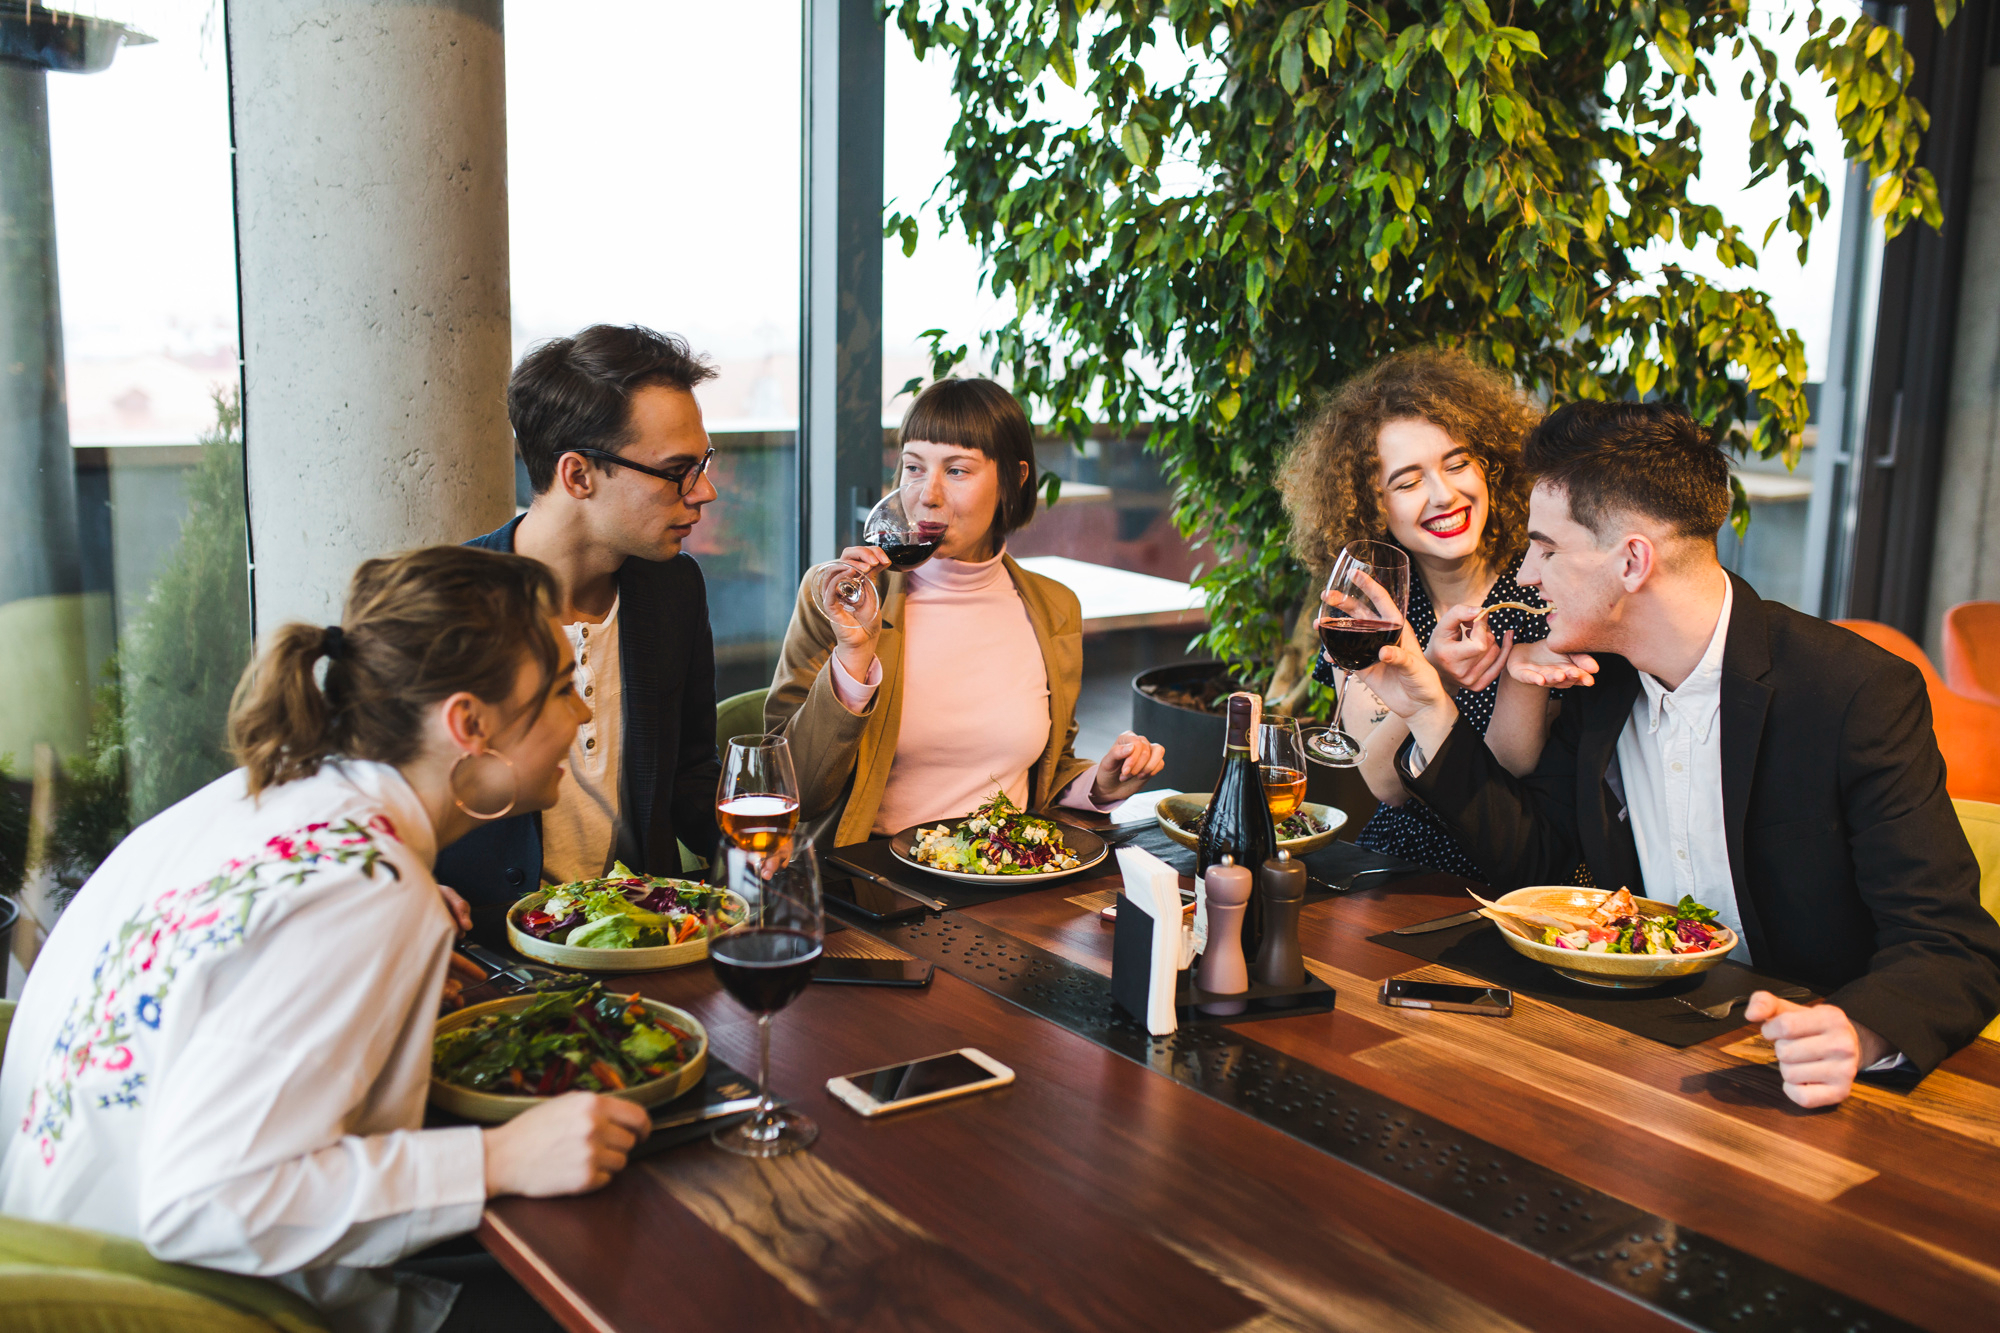 A group of friends eating in a restaurant | Source: Freepik